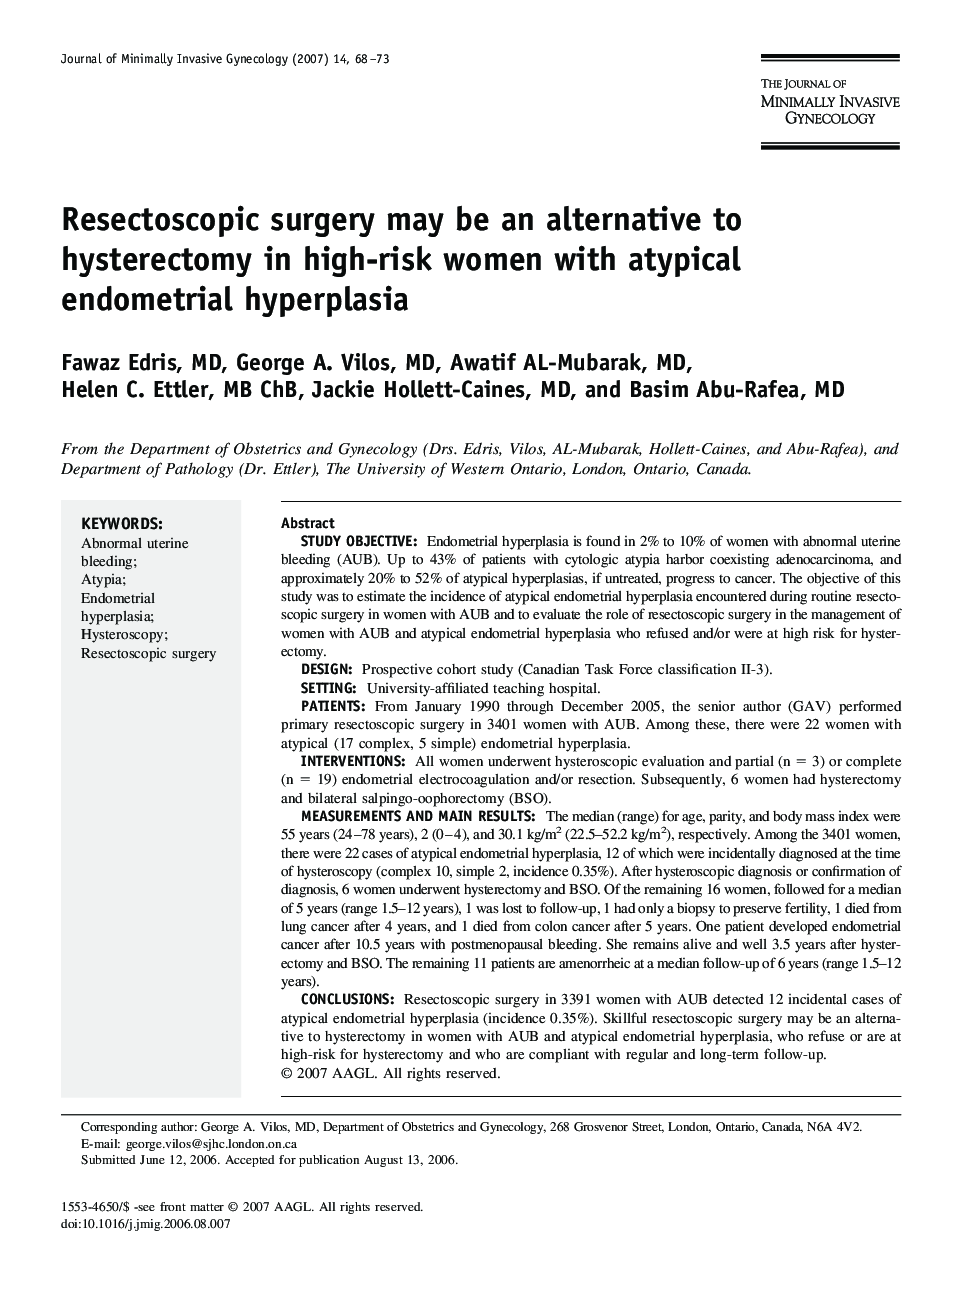 Resectoscopic surgery may be an alternative to hysterectomy in high-risk women with atypical endometrial hyperplasia